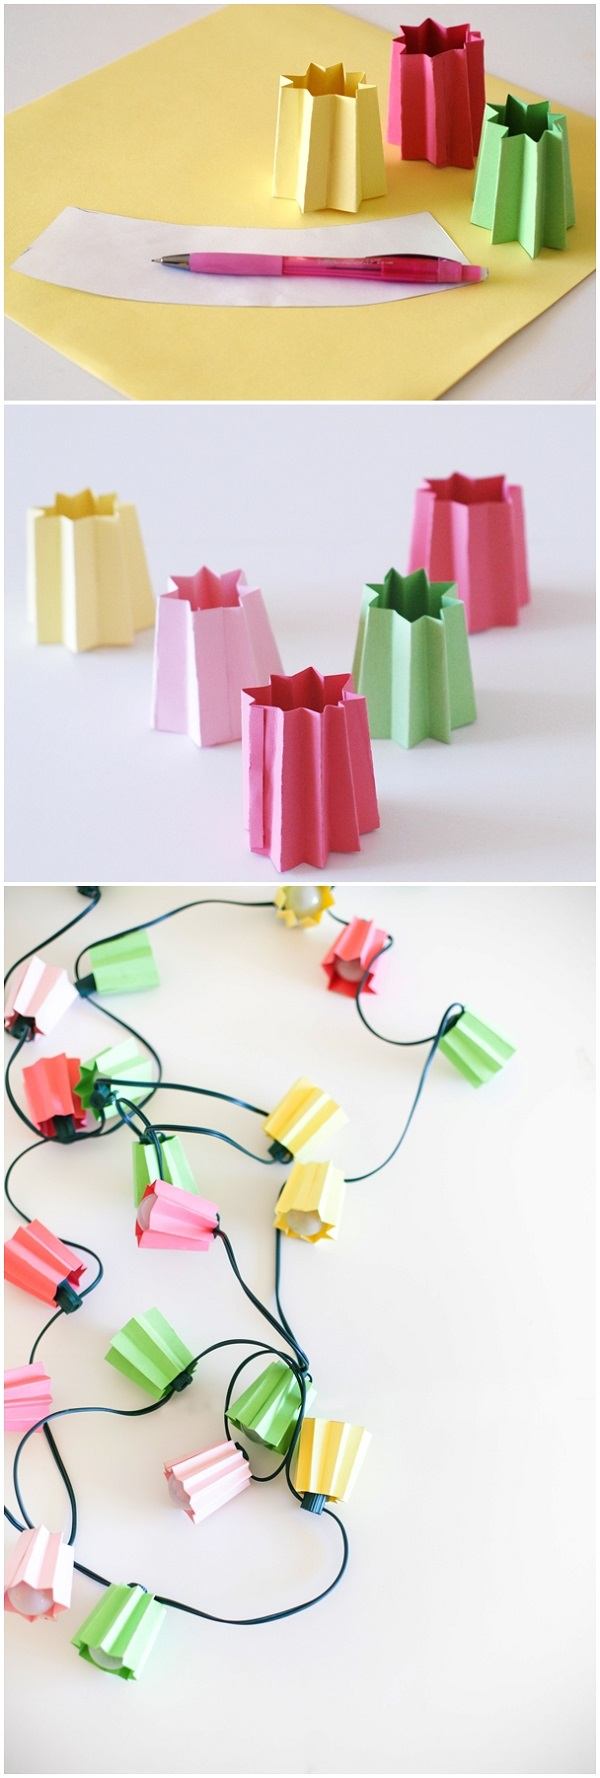 DIY colorful folded paper lights tutorial step by step